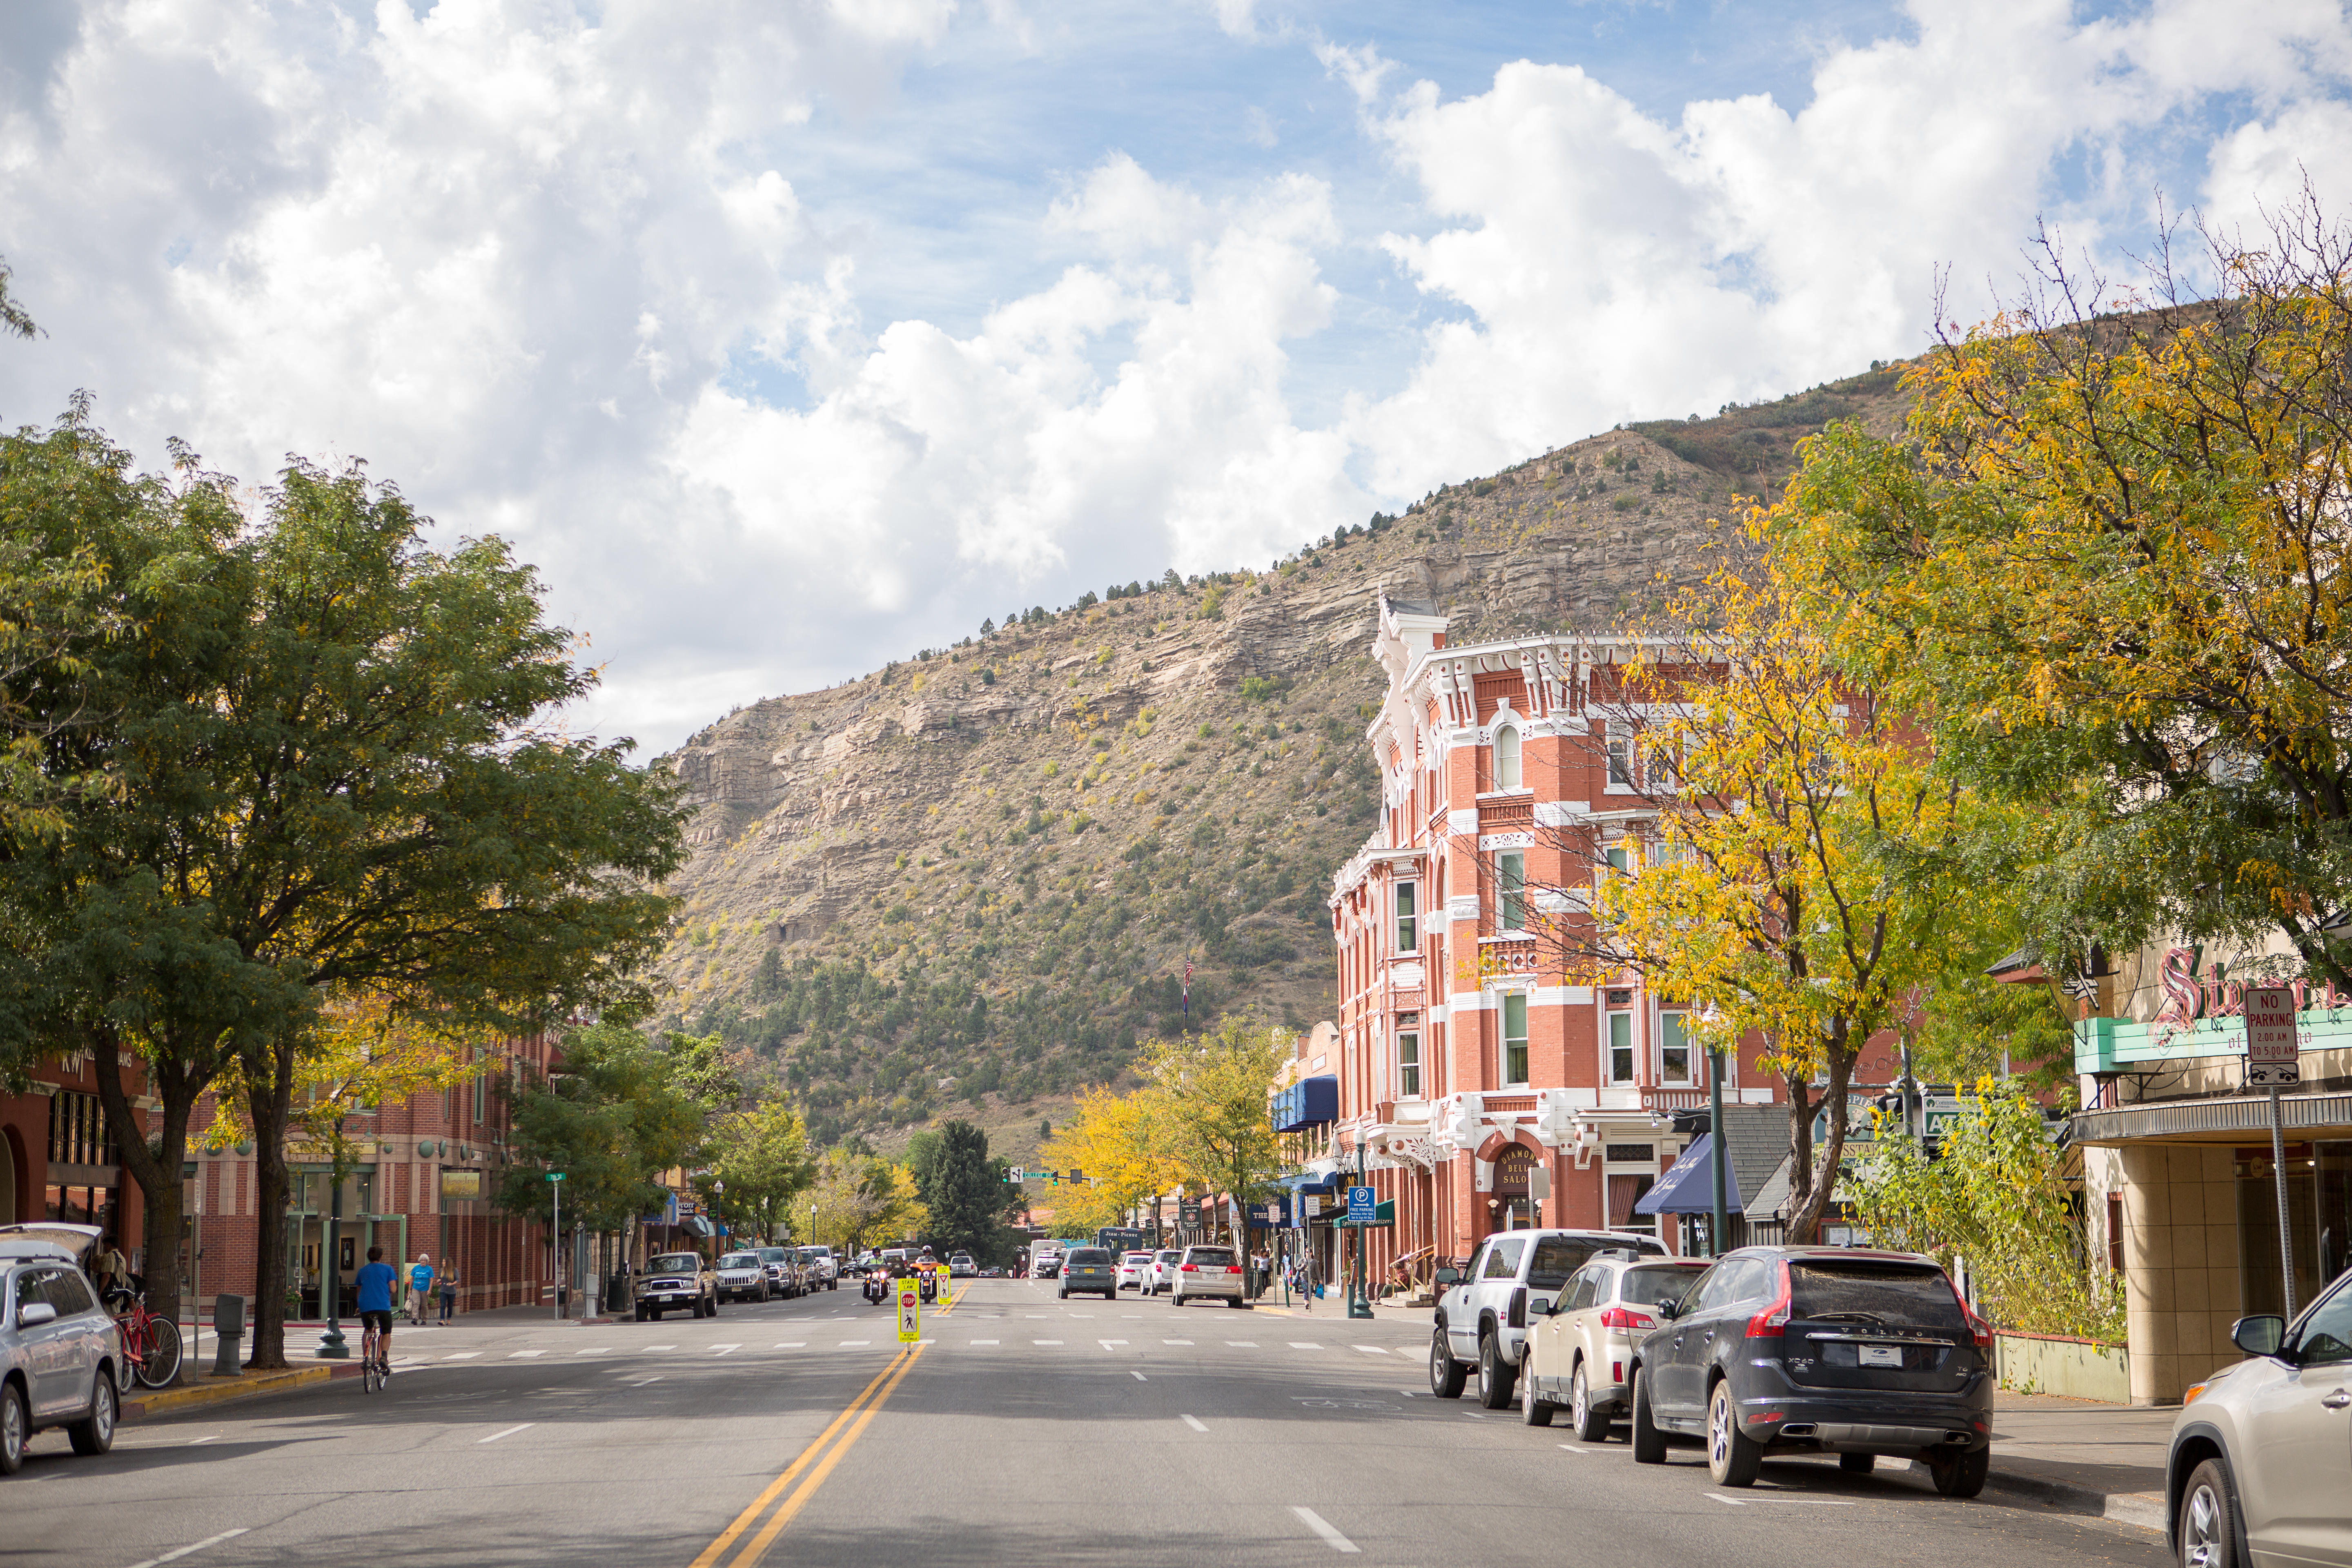 IMAGE OF FALL IN DOWNTOWN DURANGO